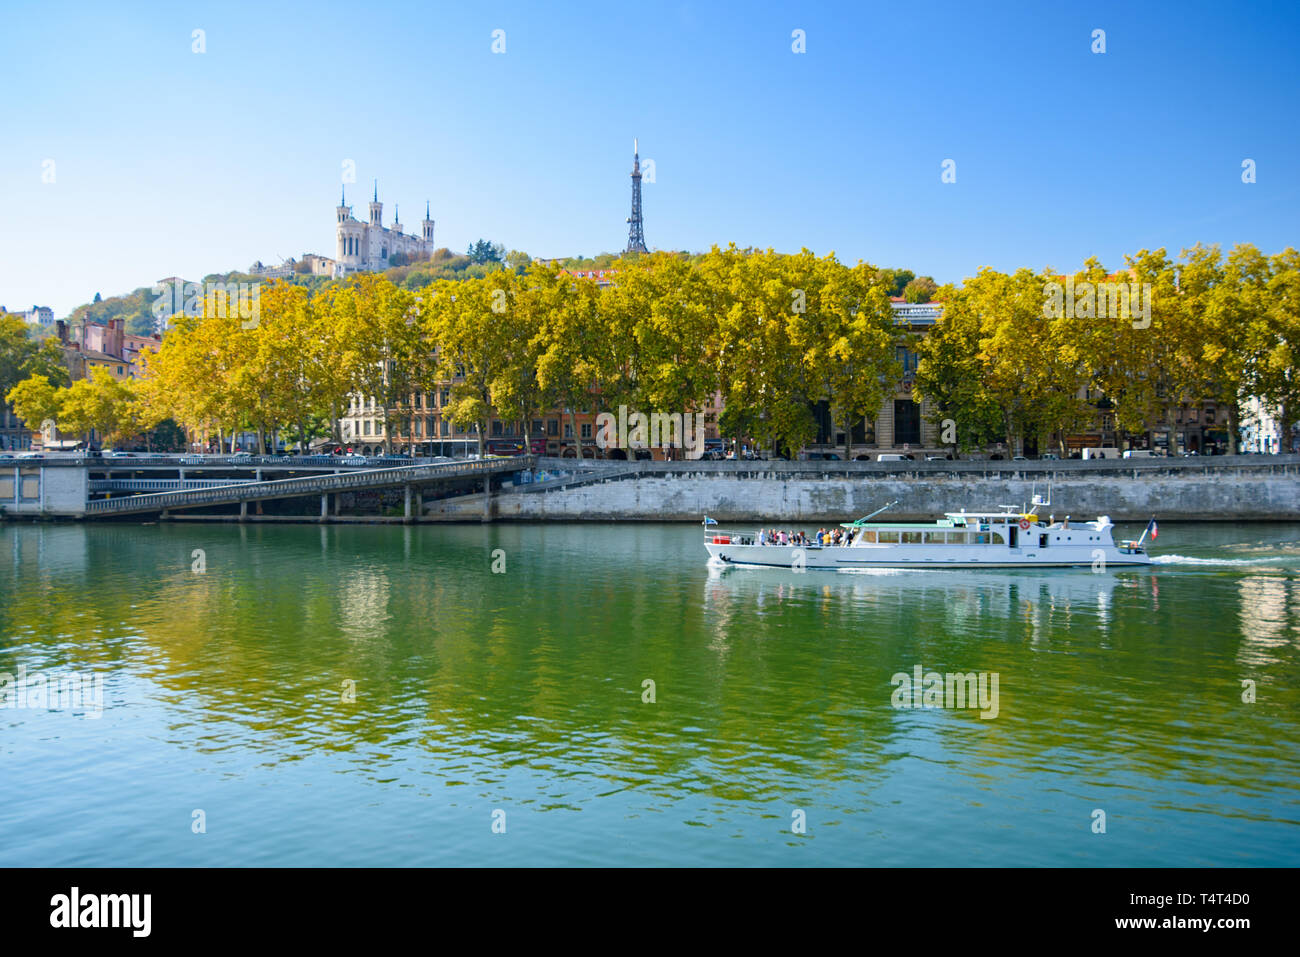 The view of riverside of Lyon, France Stock Photo